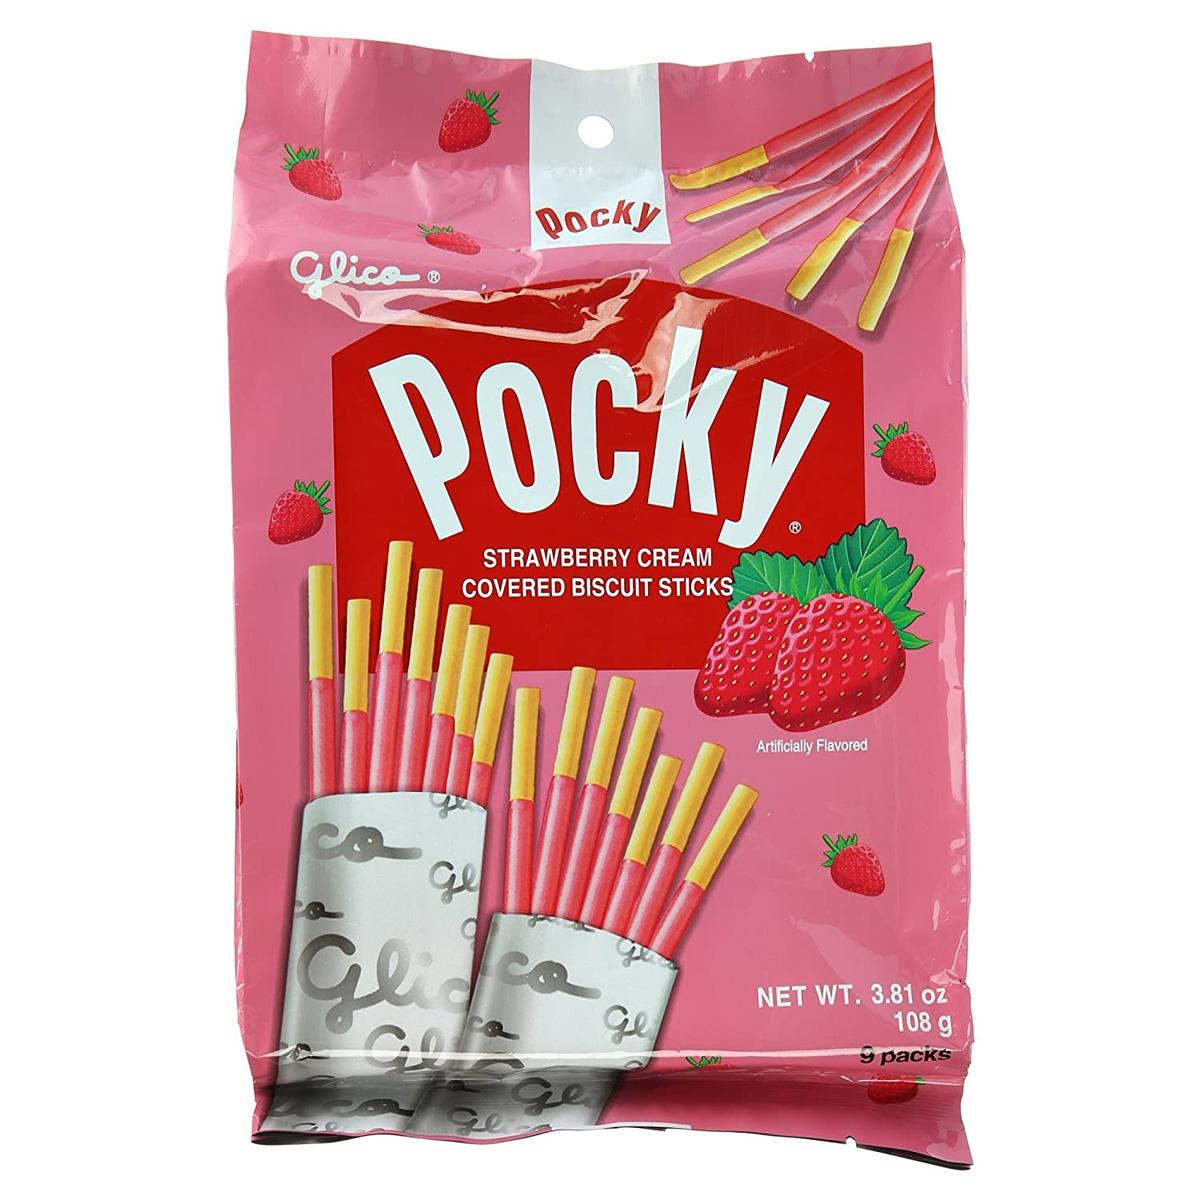 9 Glico Pocky Strawberry Cream Covered Biscuit Sticks for $3.31 Shipped